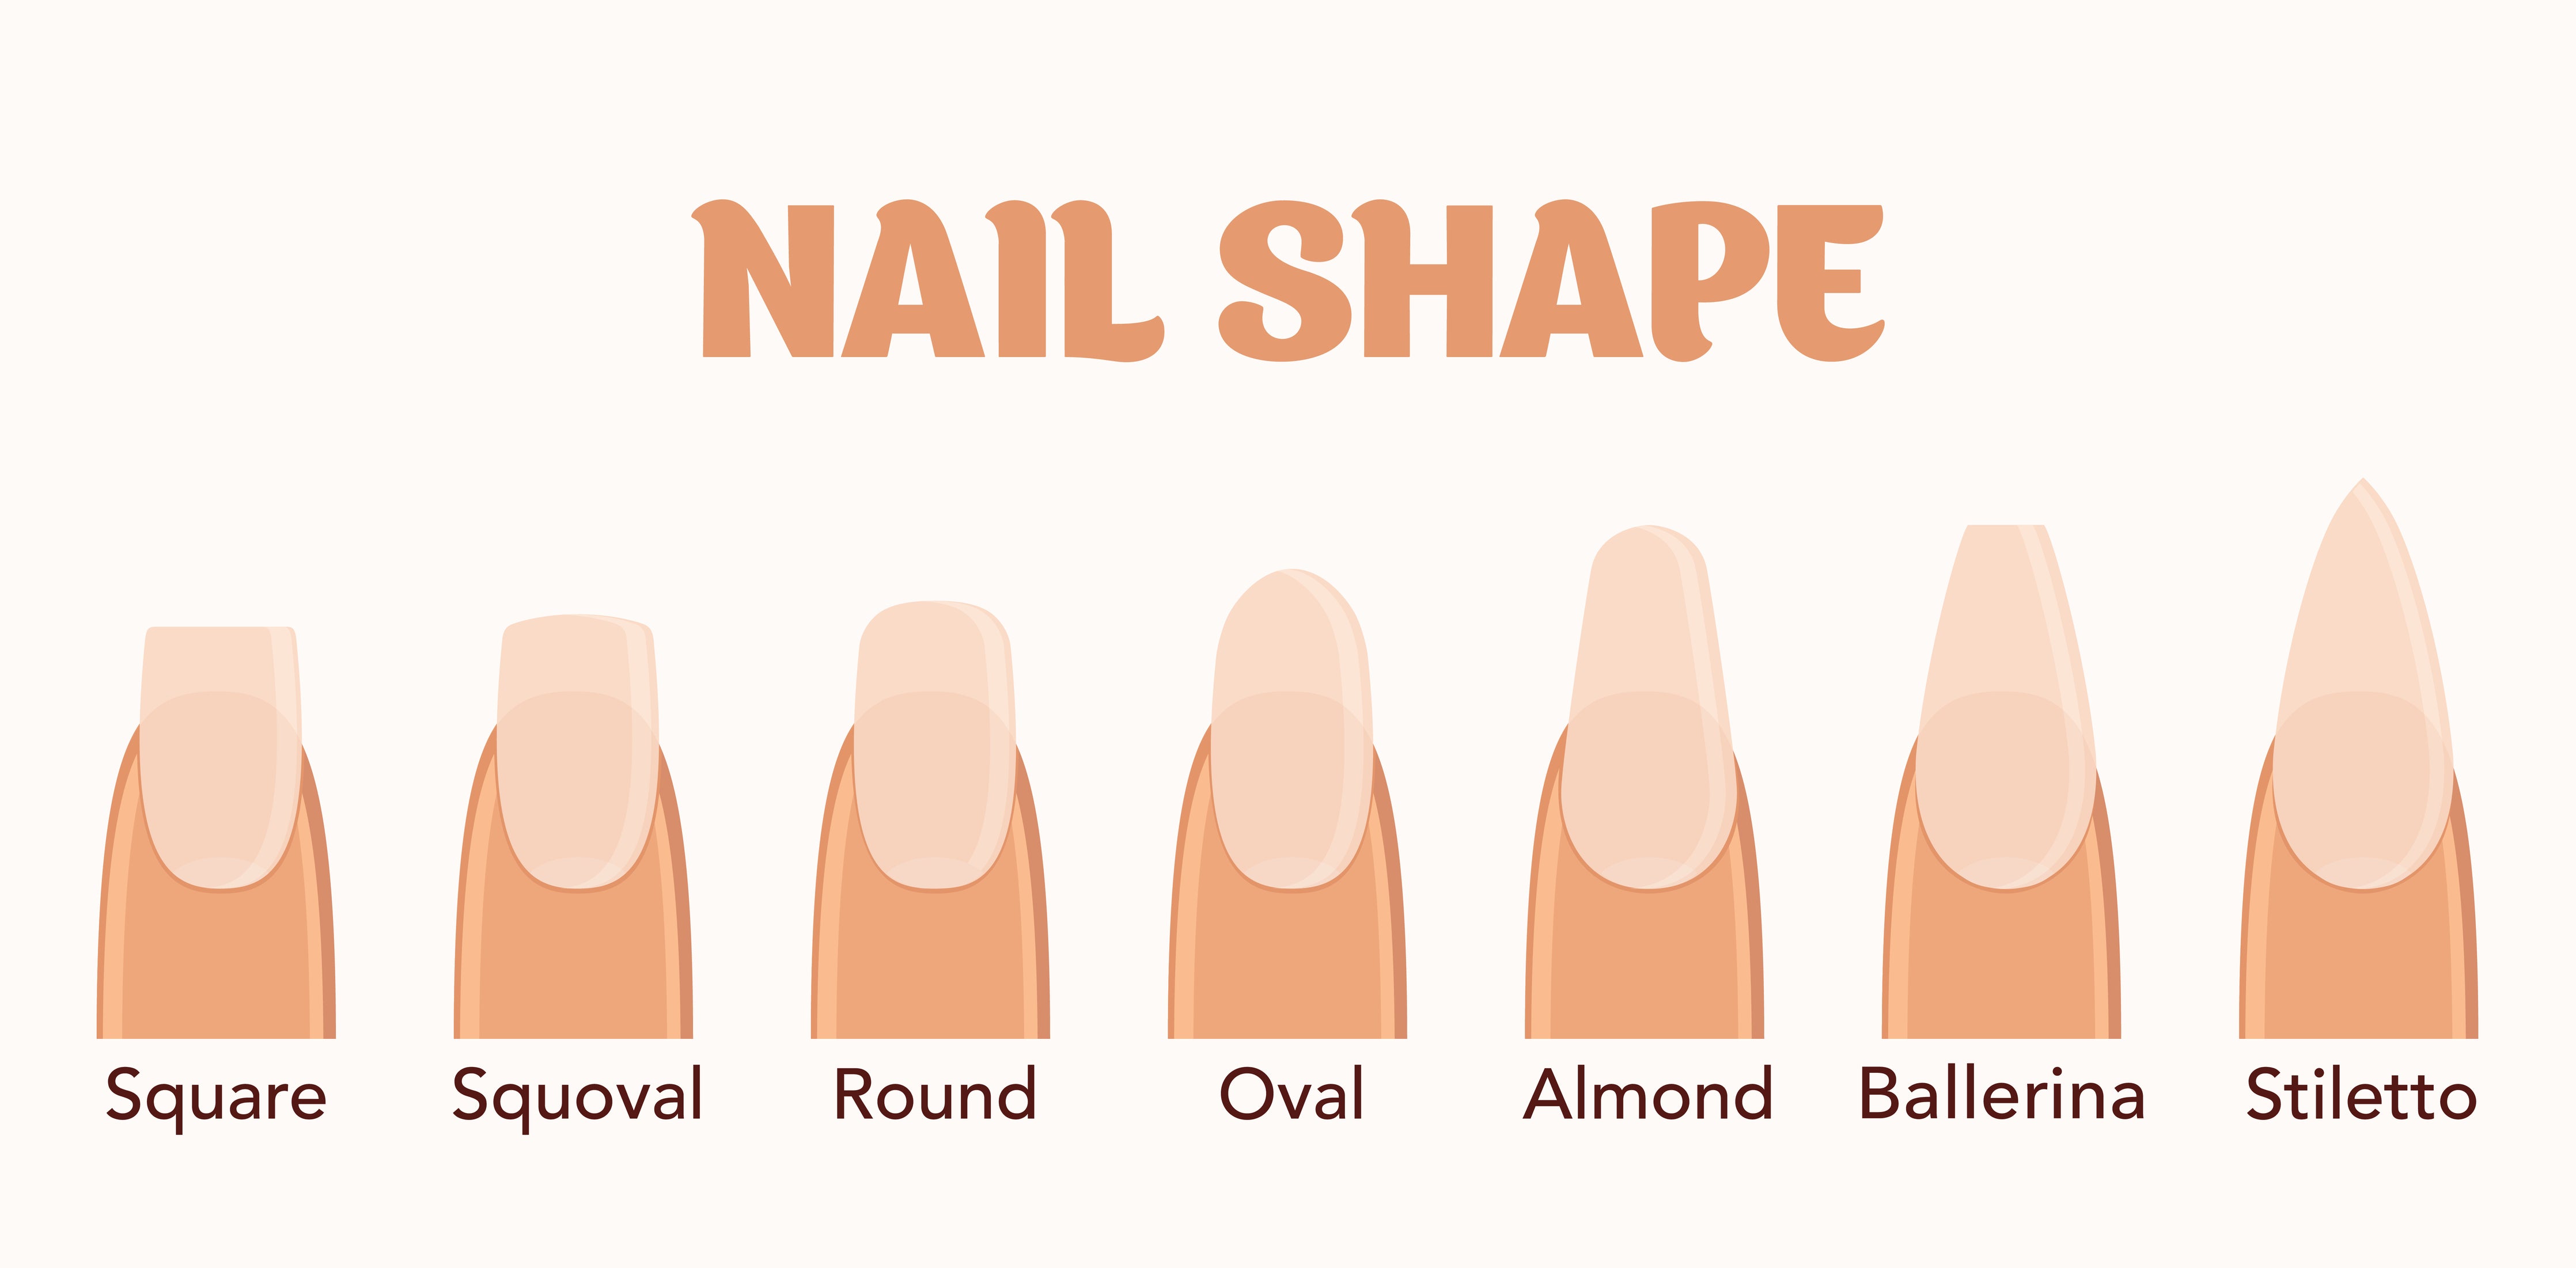 9. 10 Long Nail Designs for Every Nail Shape - wide 5